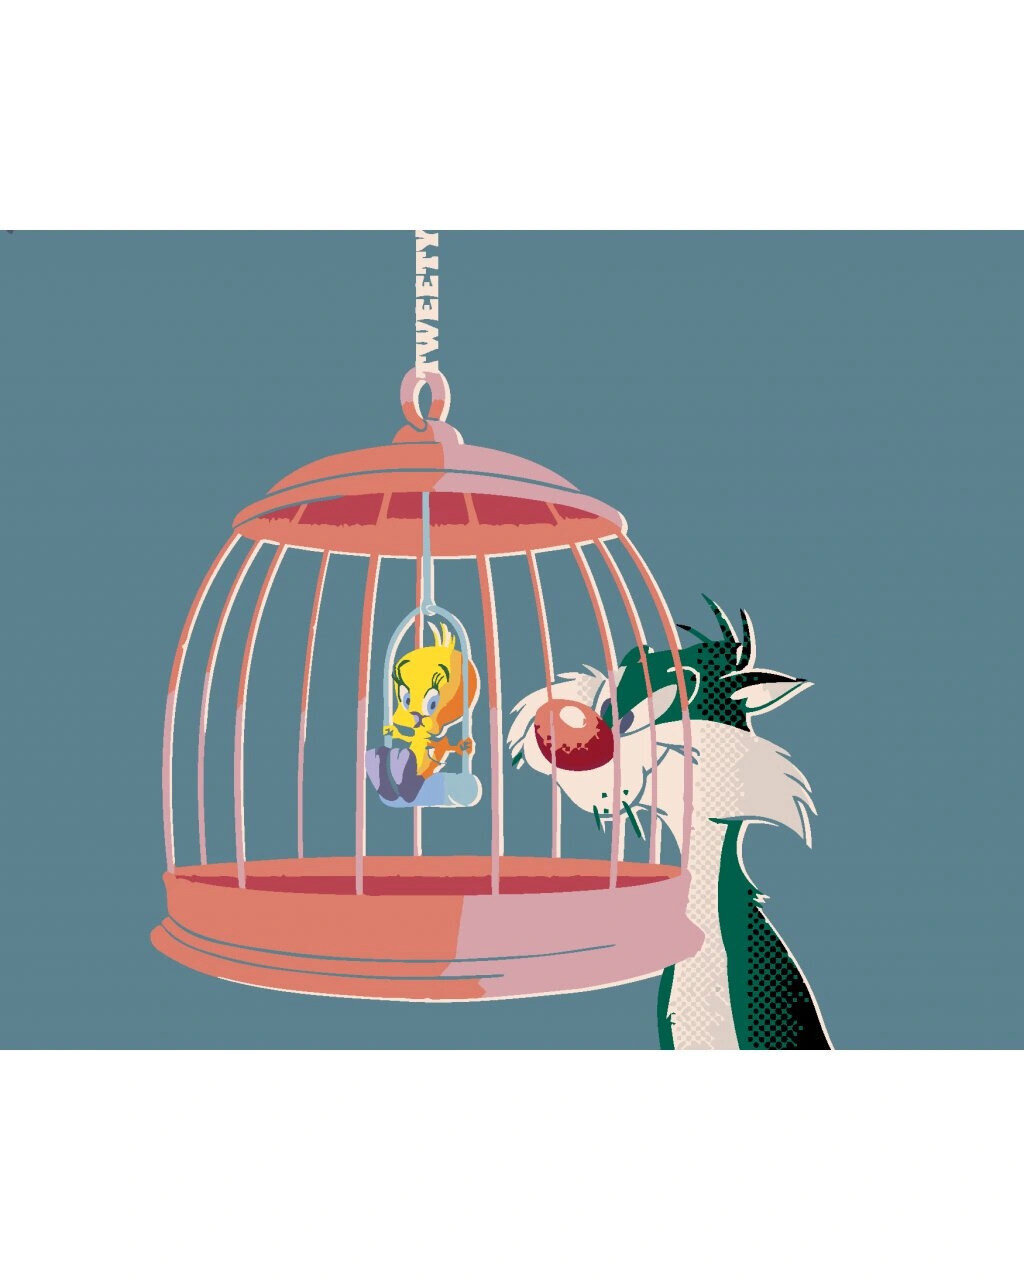 Maling efter tal Zuty Maling efter tal Sylvester og Tweety in the Cage (Looney Tunes)